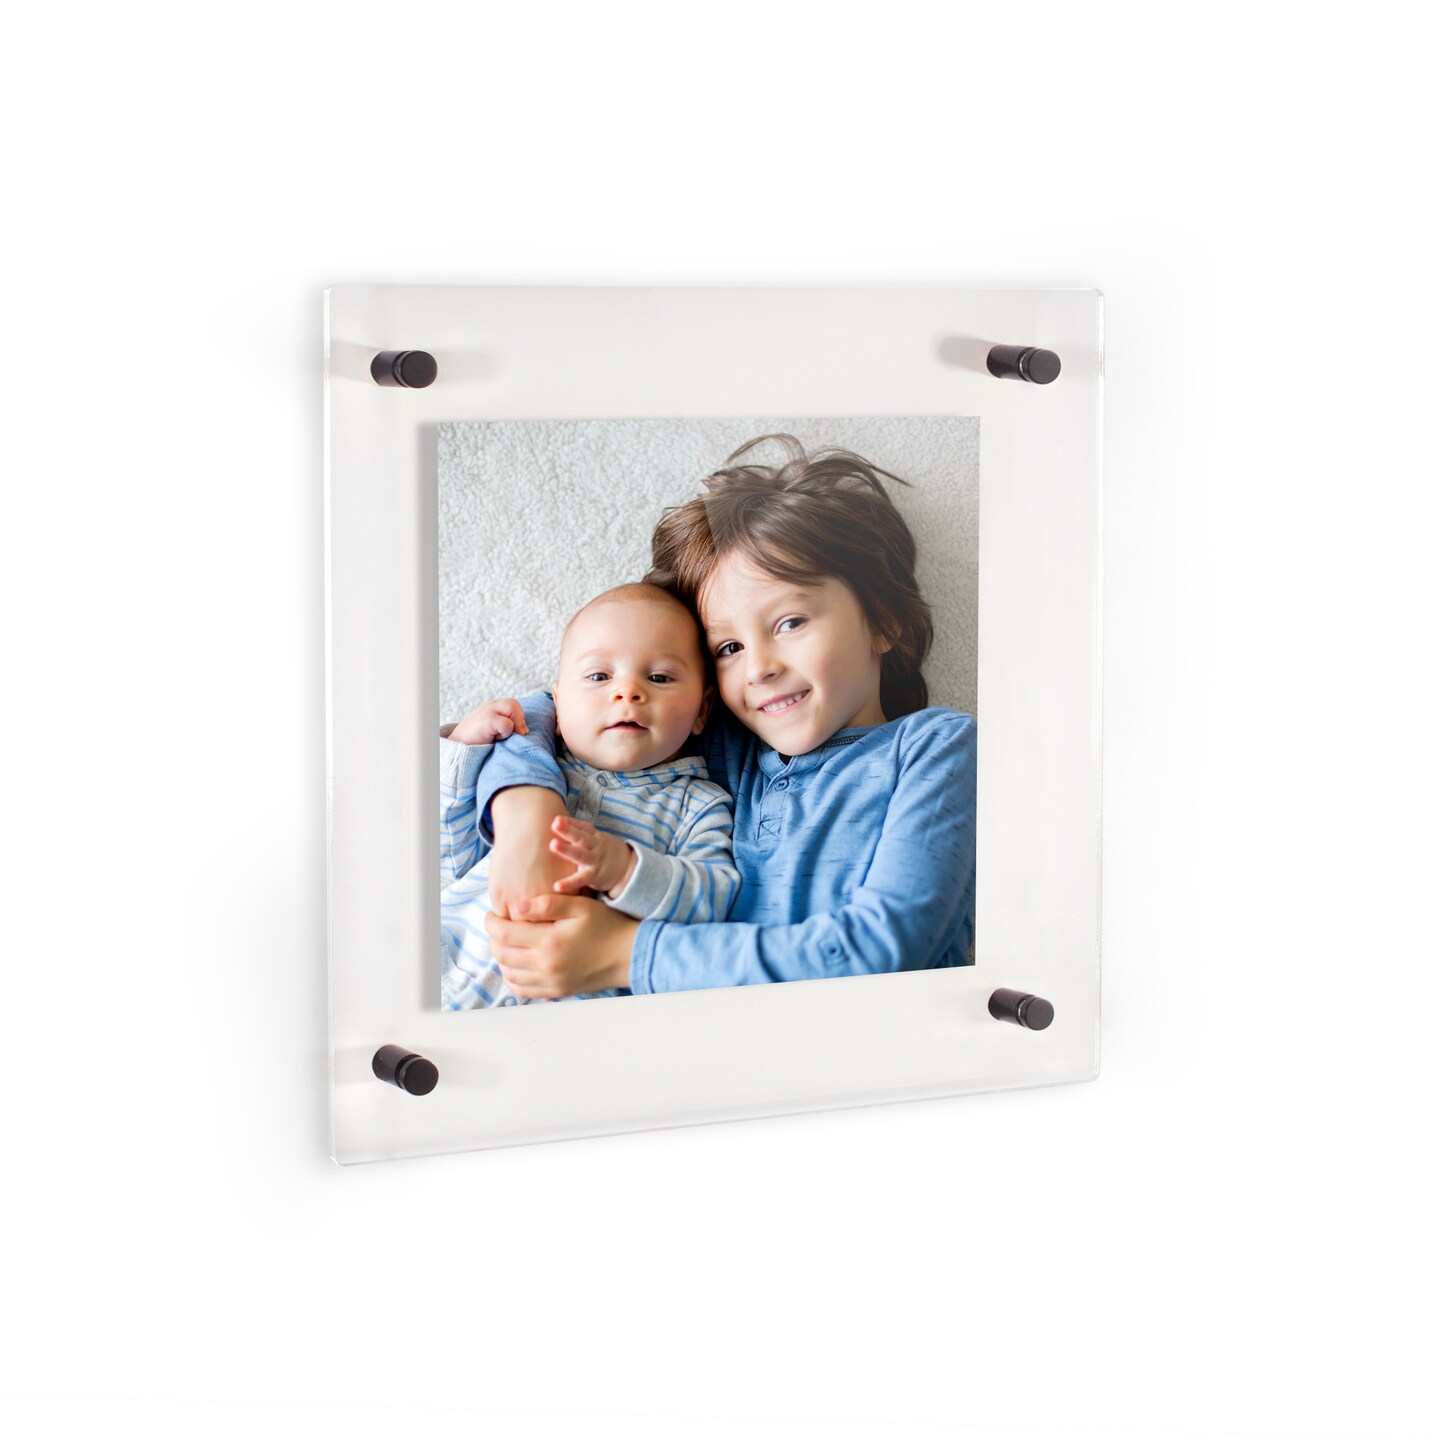 Acrylic Block 18x18 Wall-Mounted Picture Frame